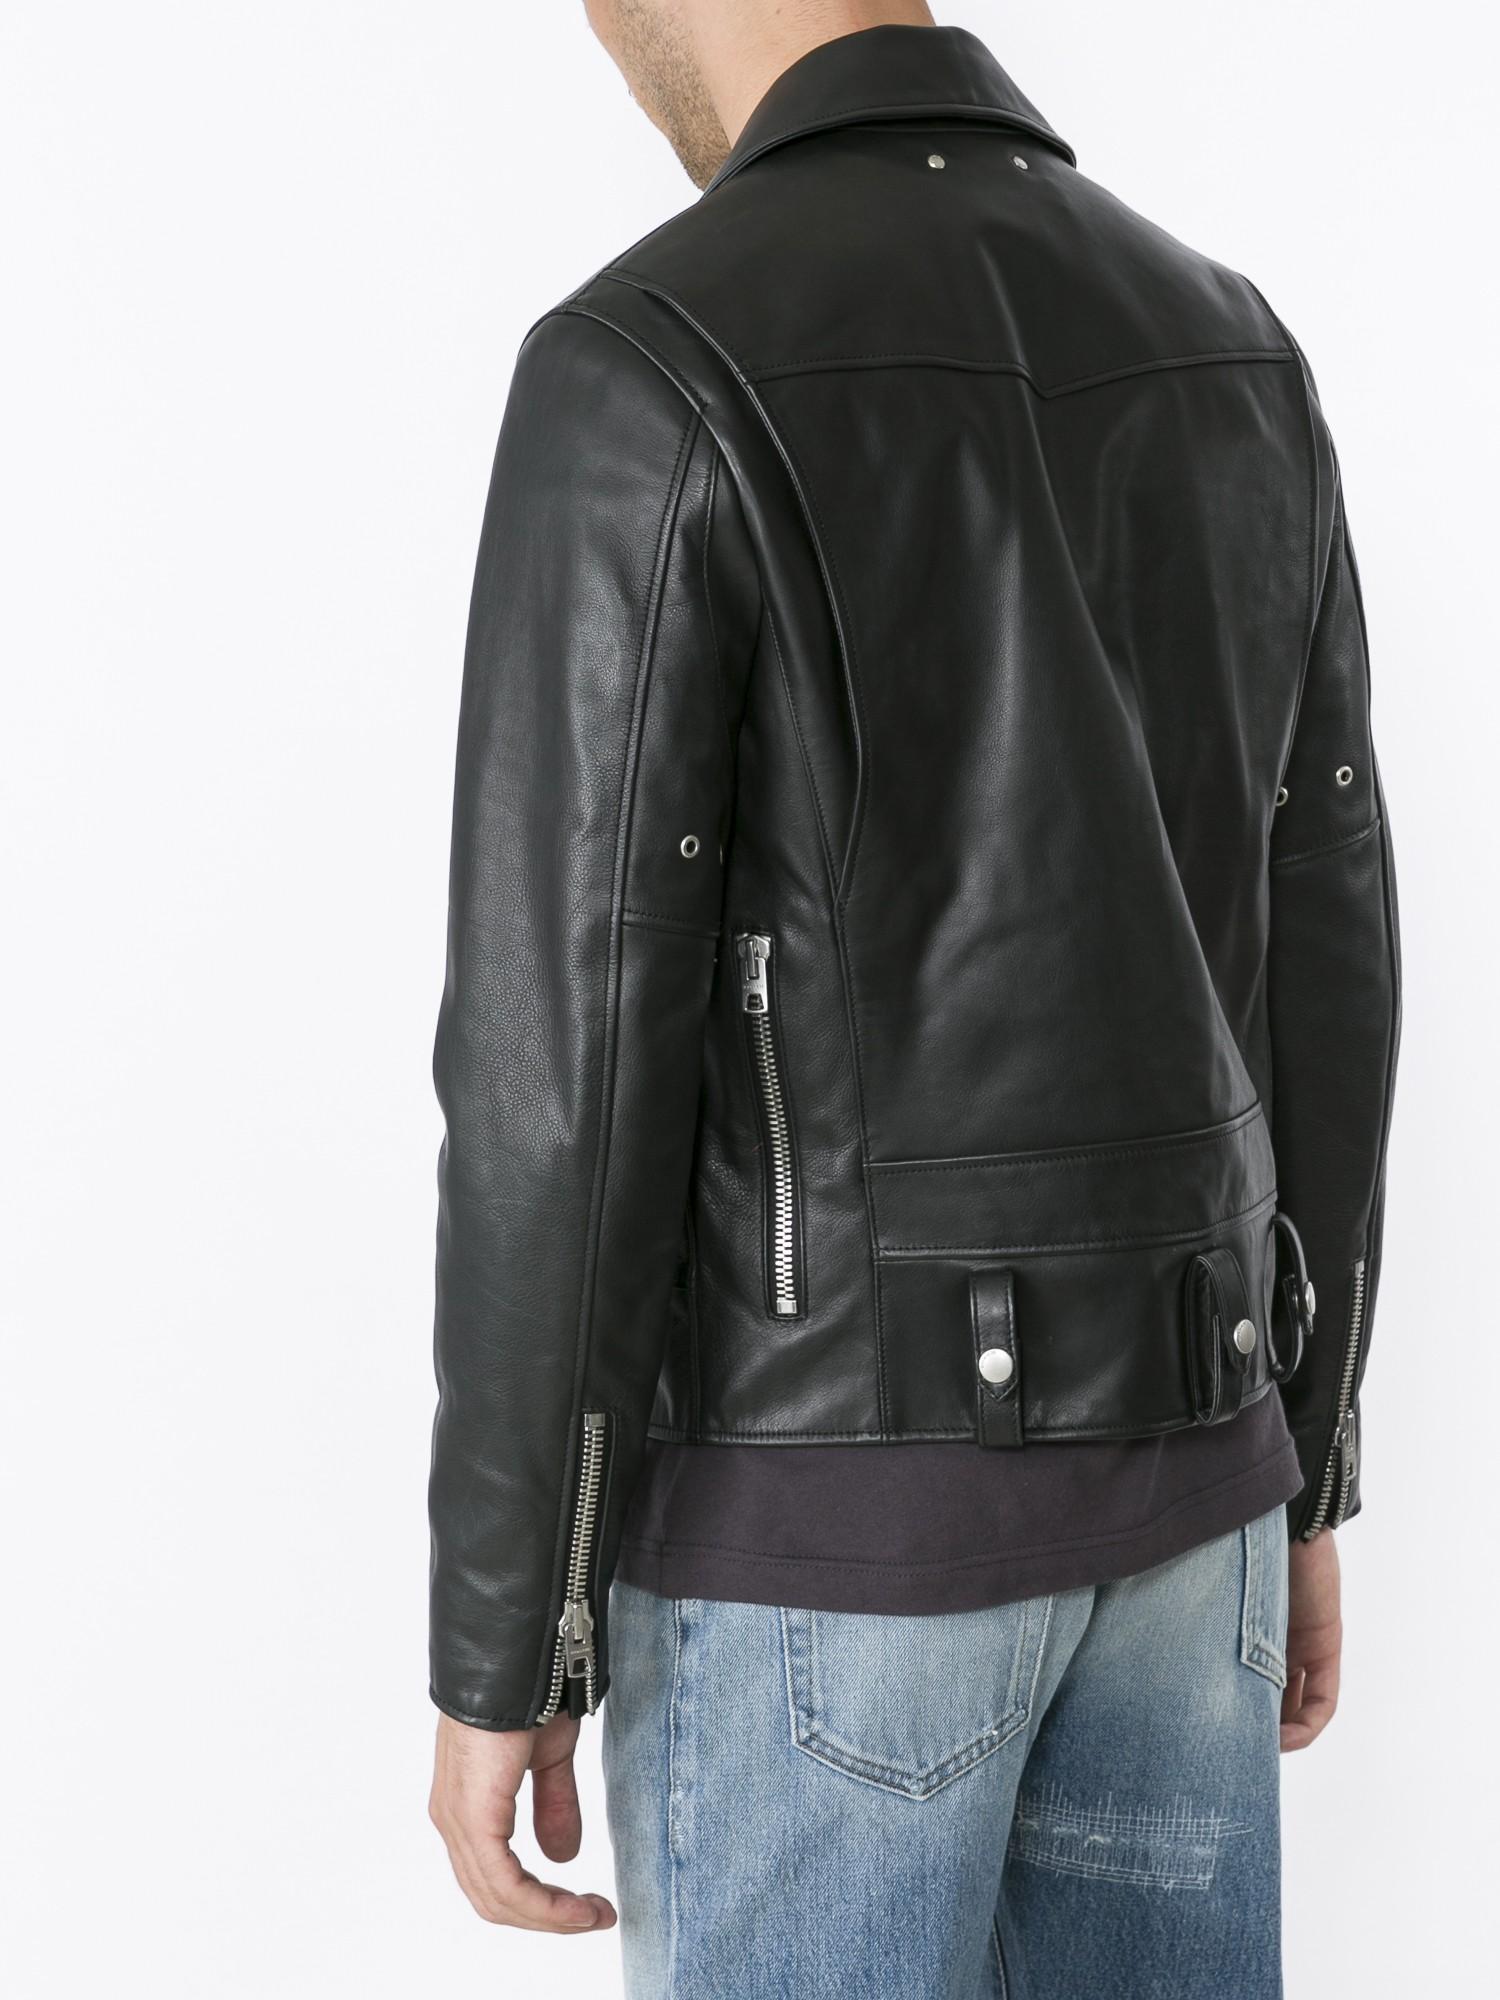 COACH Leather Moto Jacket in Black for Men Lyst